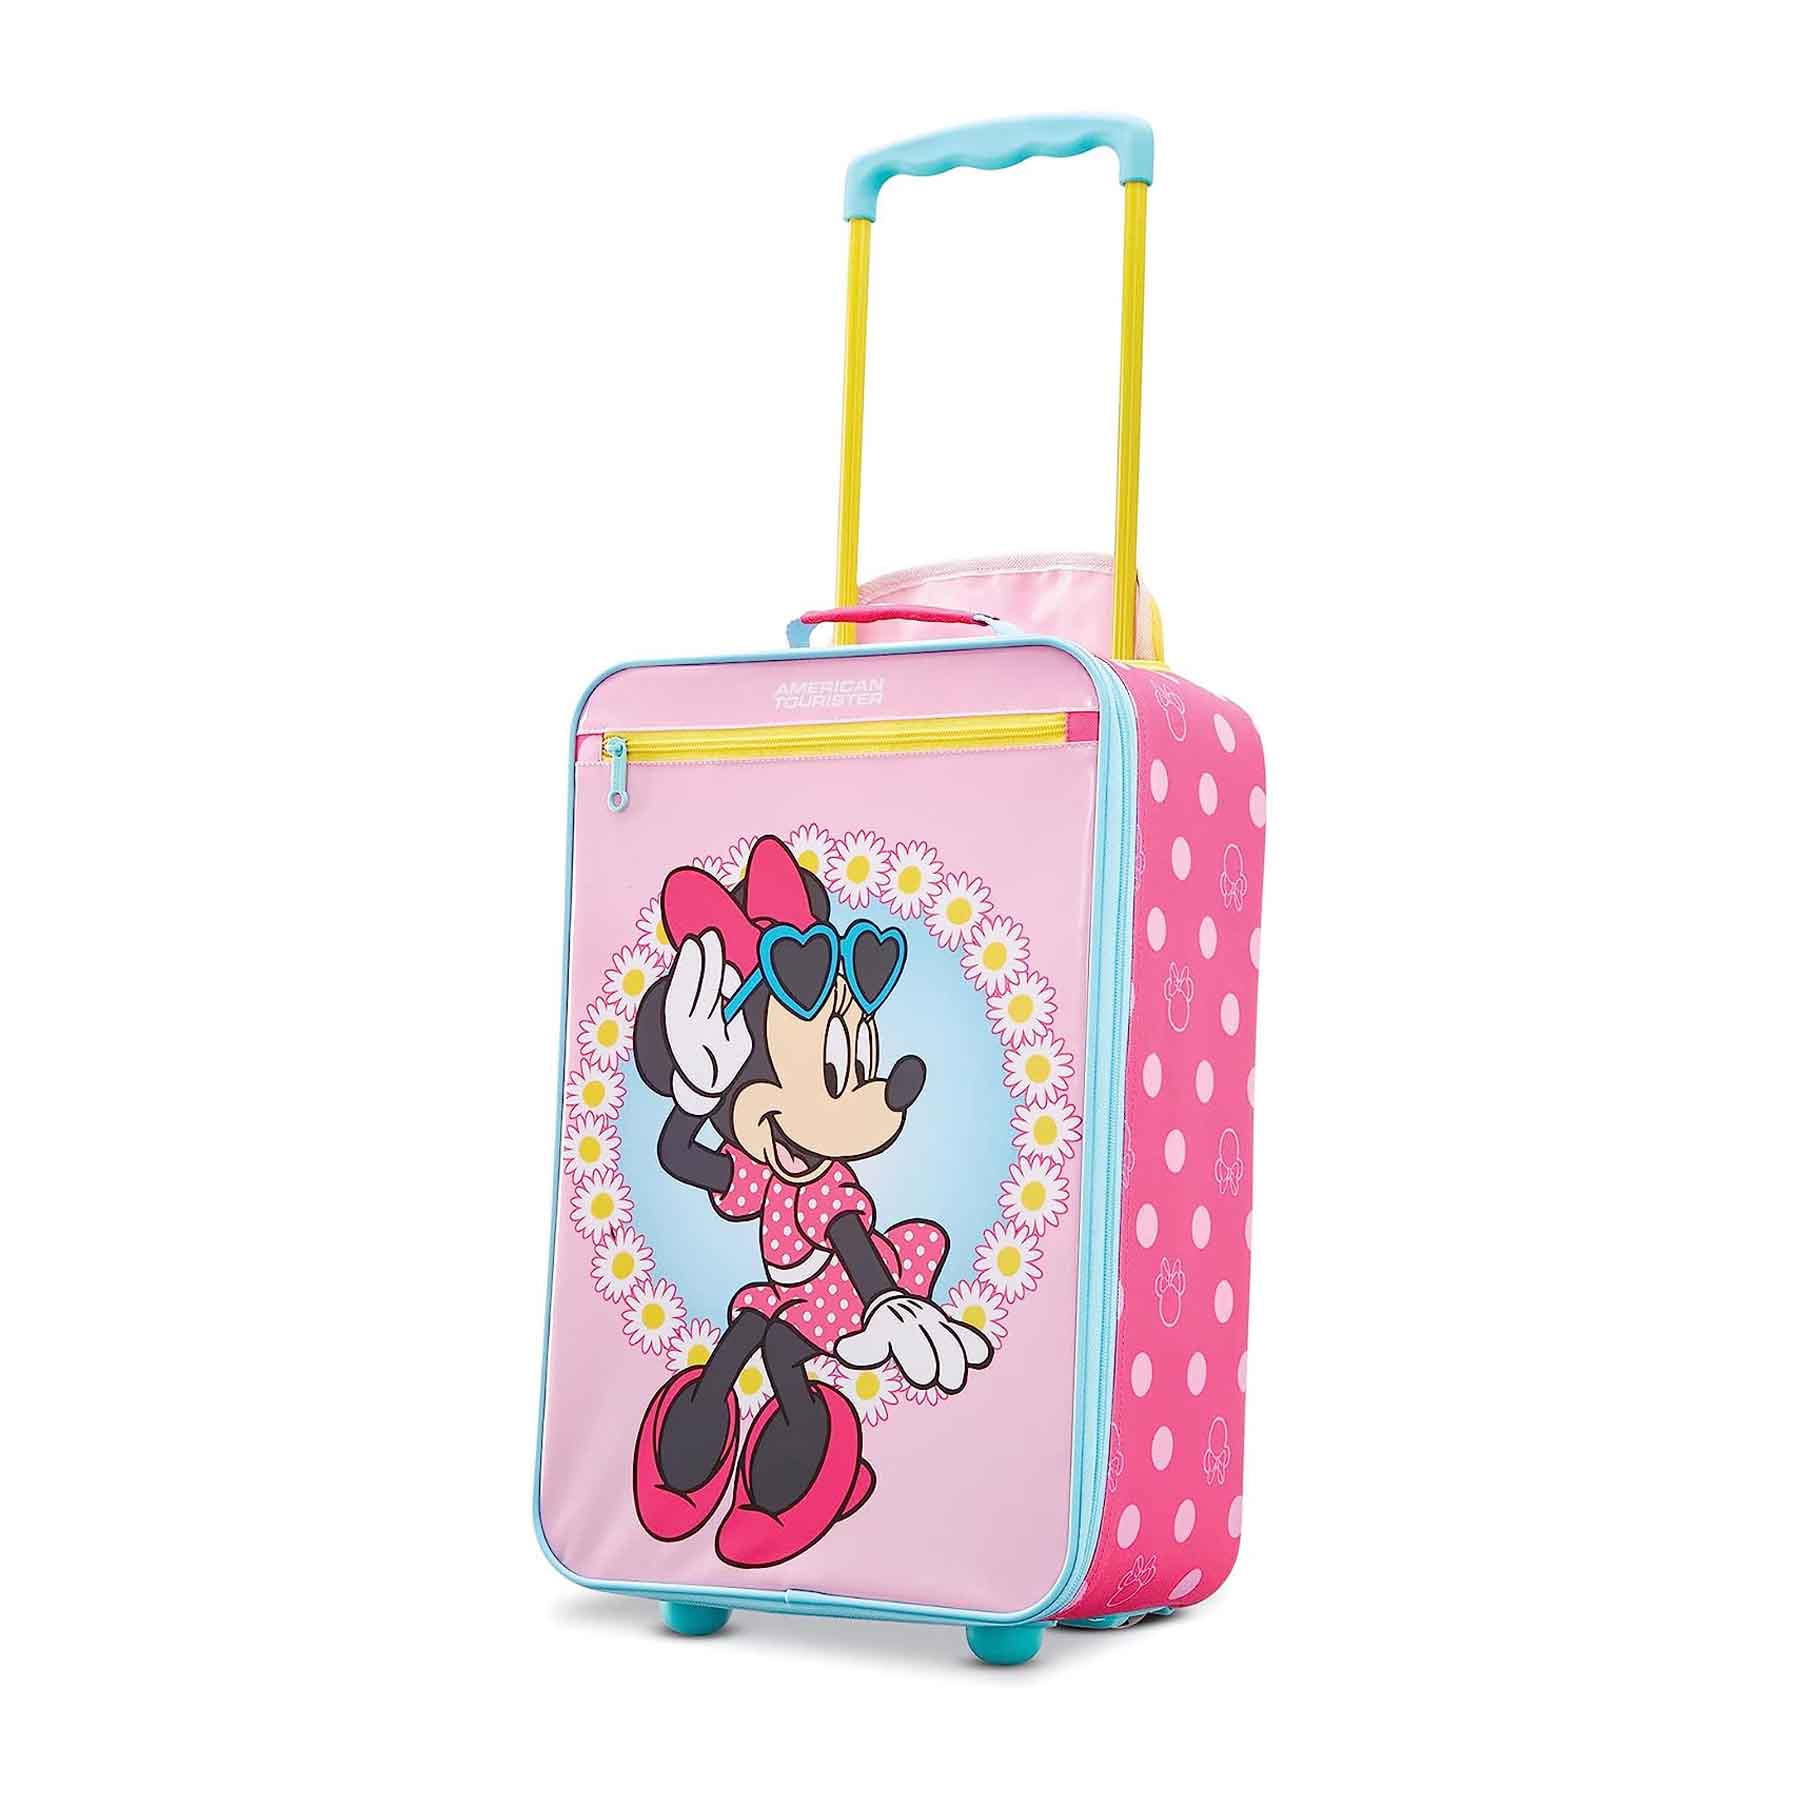 AMERICAN TOURISTER Kids' Disney Softside Upright Luggage with Minnie Mouse design